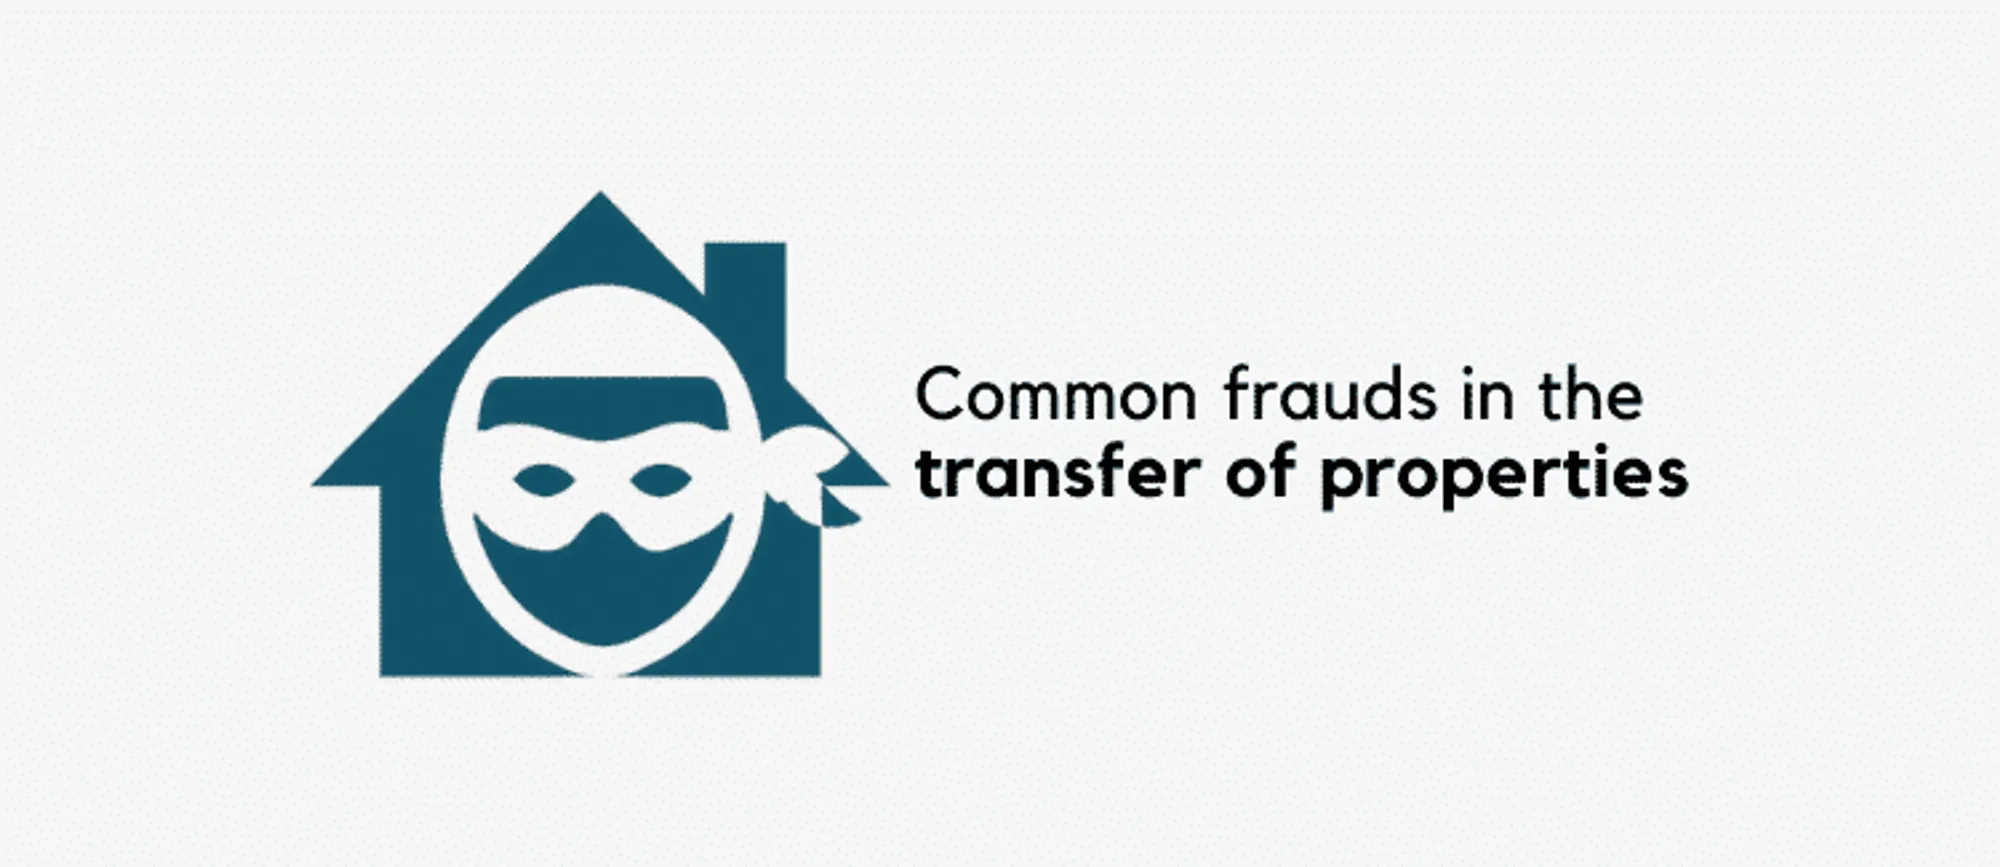 Common frauds in the transfer of properties